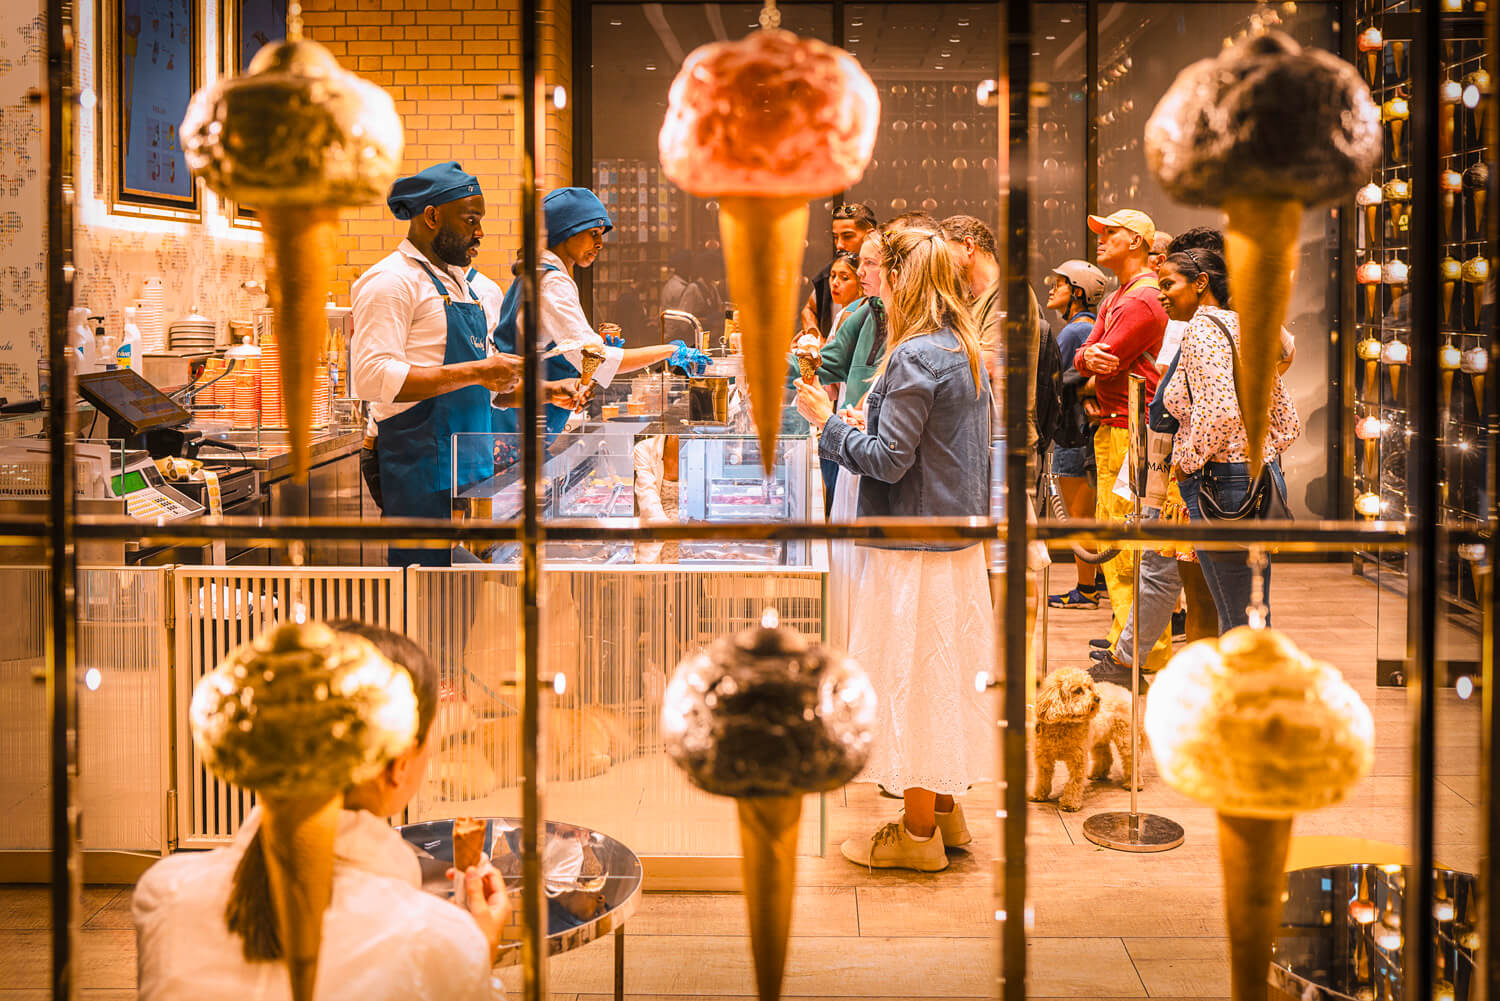 The photo presents a vibrant ice cream parlor, bustling with activity. Through the glass window, adorned with displays of ice cream cones, the interior scene unfolds with staff in blue aprons serving eager customers.